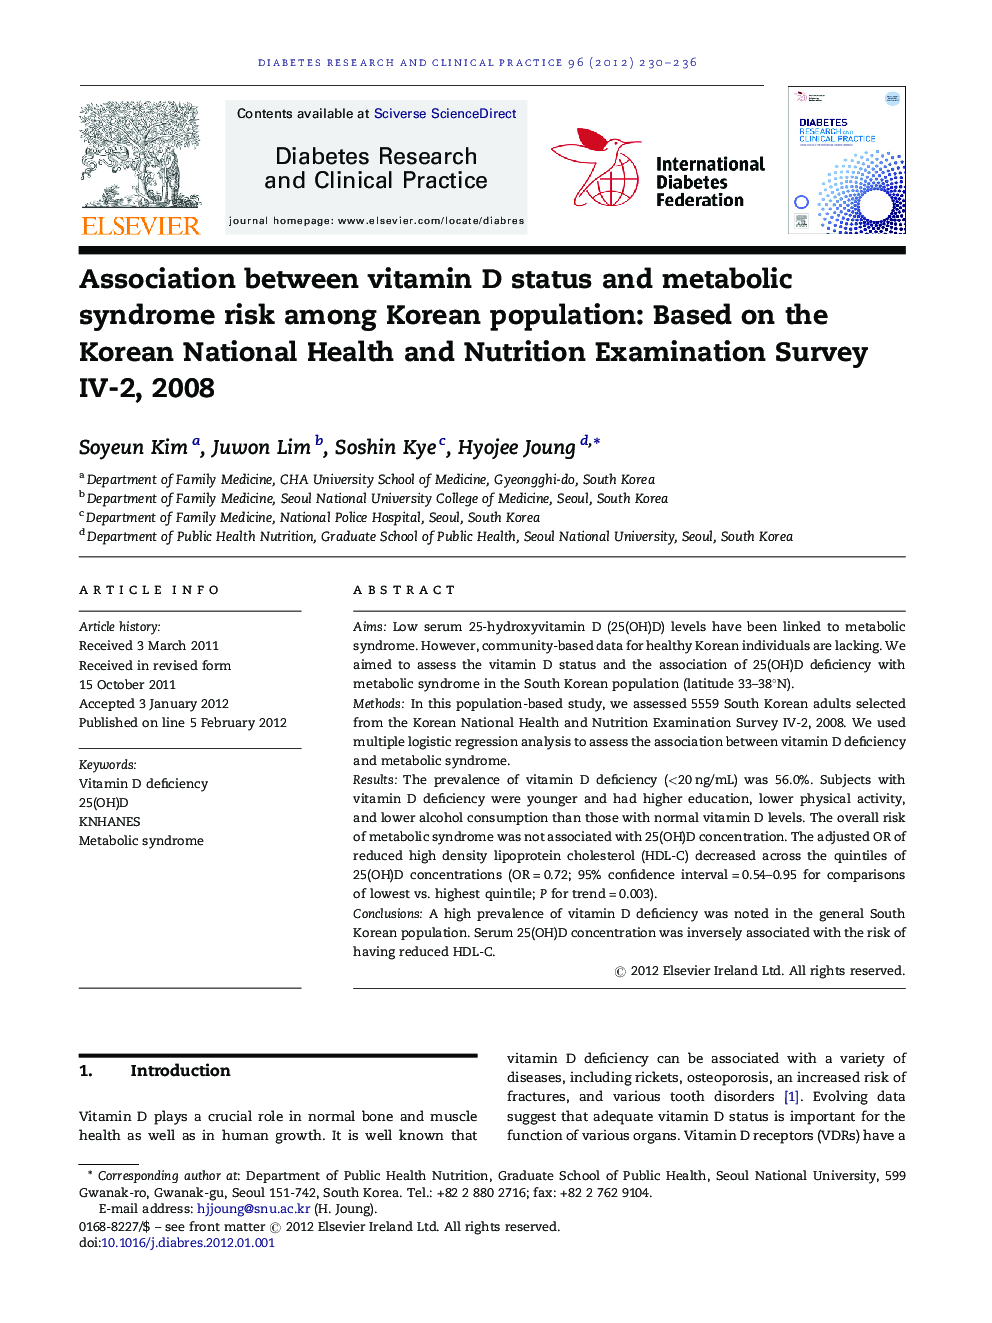 Association between vitamin D status and metabolic syndrome risk among Korean population: Based on the Korean National Health and Nutrition Examination Survey IV-2, 2008